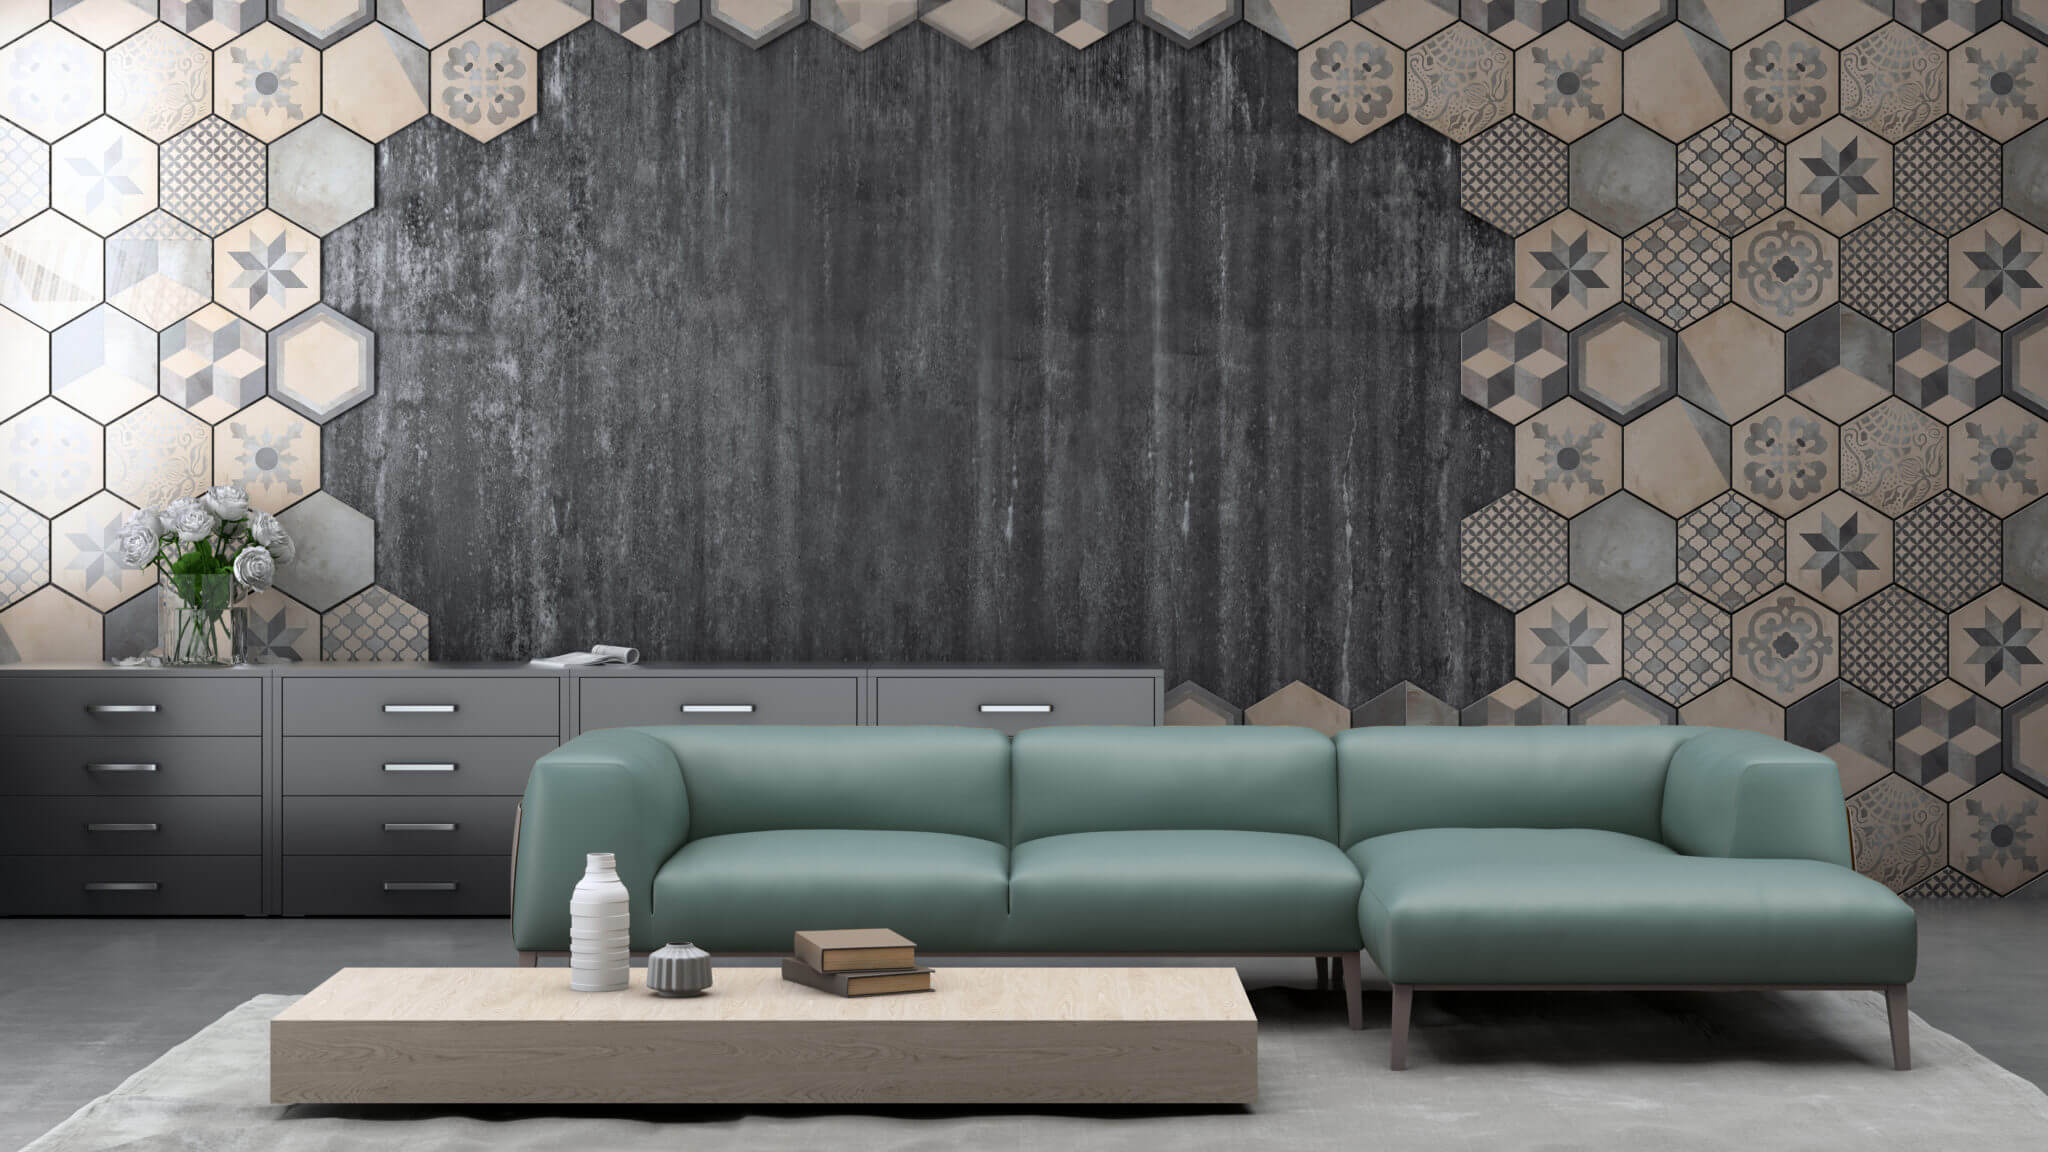 Patterned beige hexagon wall tiles in a staggered design